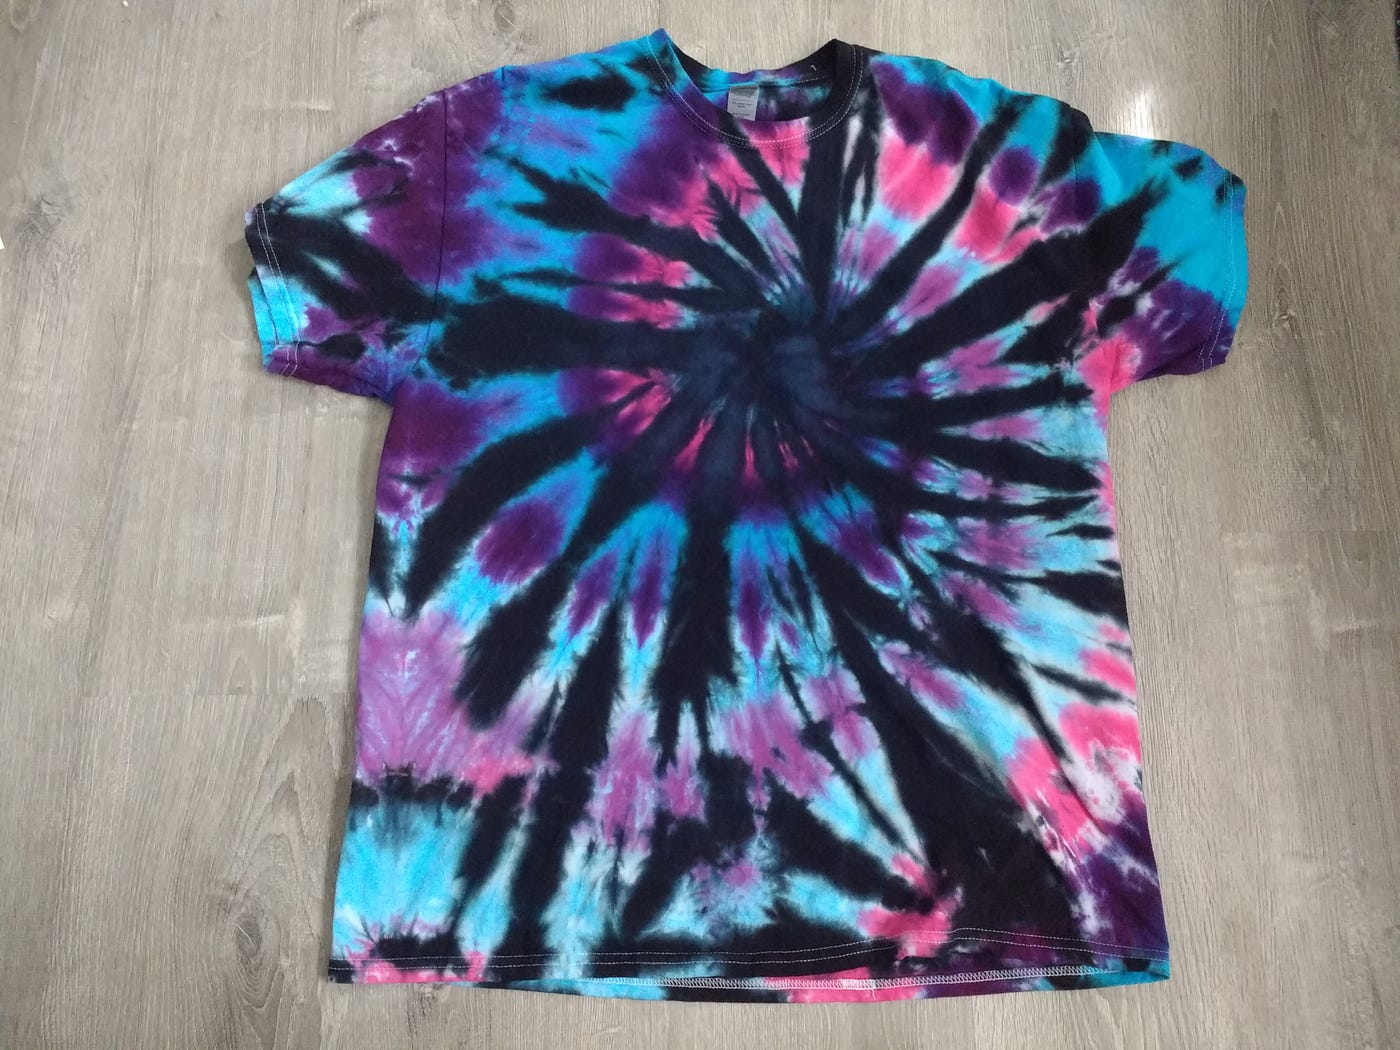 The Complete Guide to Soda Ash Tie Dye: Best Practices & Tips